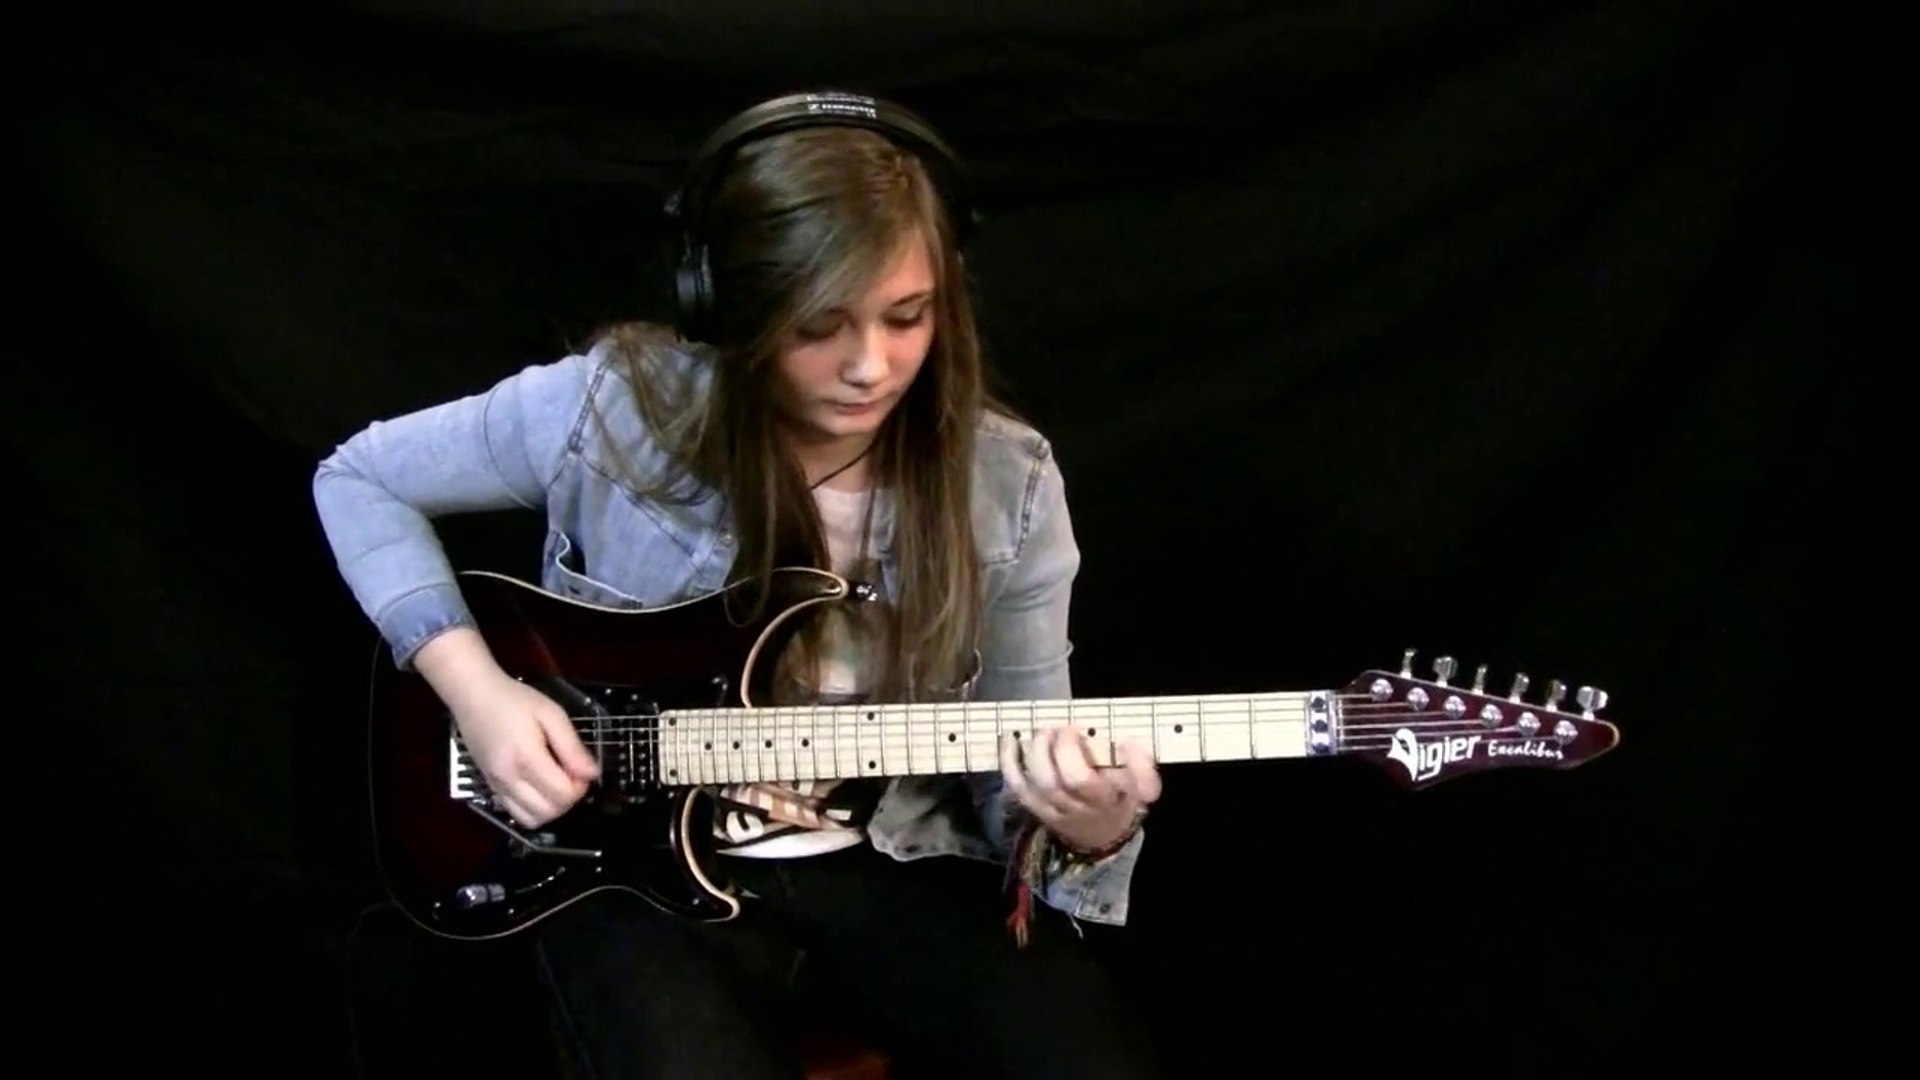 This 15 year-old girl is a real Guitar Hero! Dragon Force - Through The  Fire And Flames cover - Vidéo Dailymotion